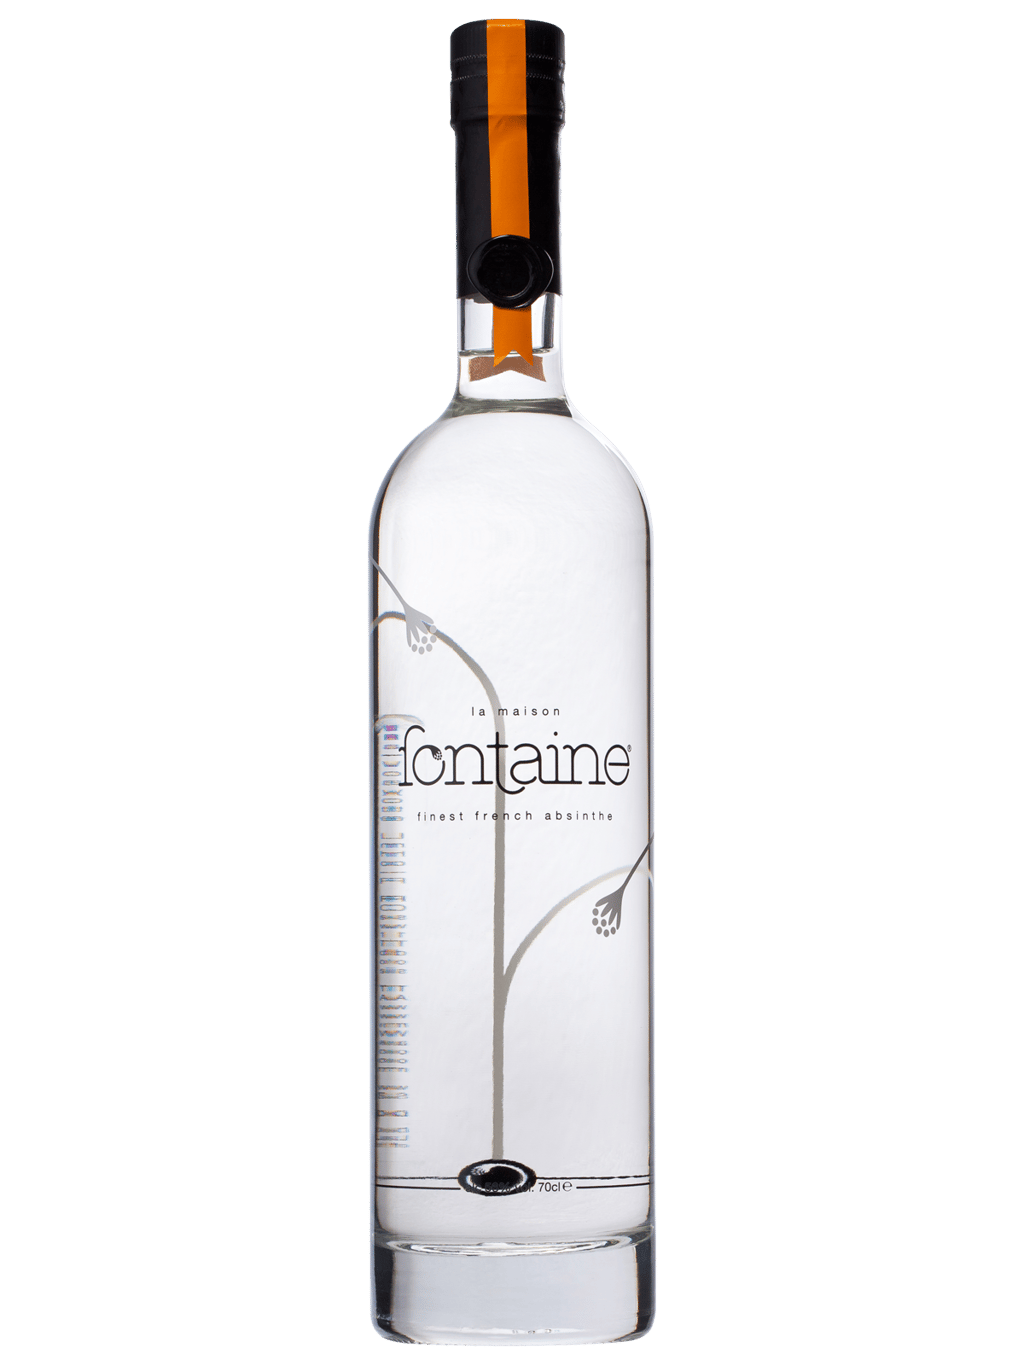 Maison Absinthe - Did you know that because absinthe has a